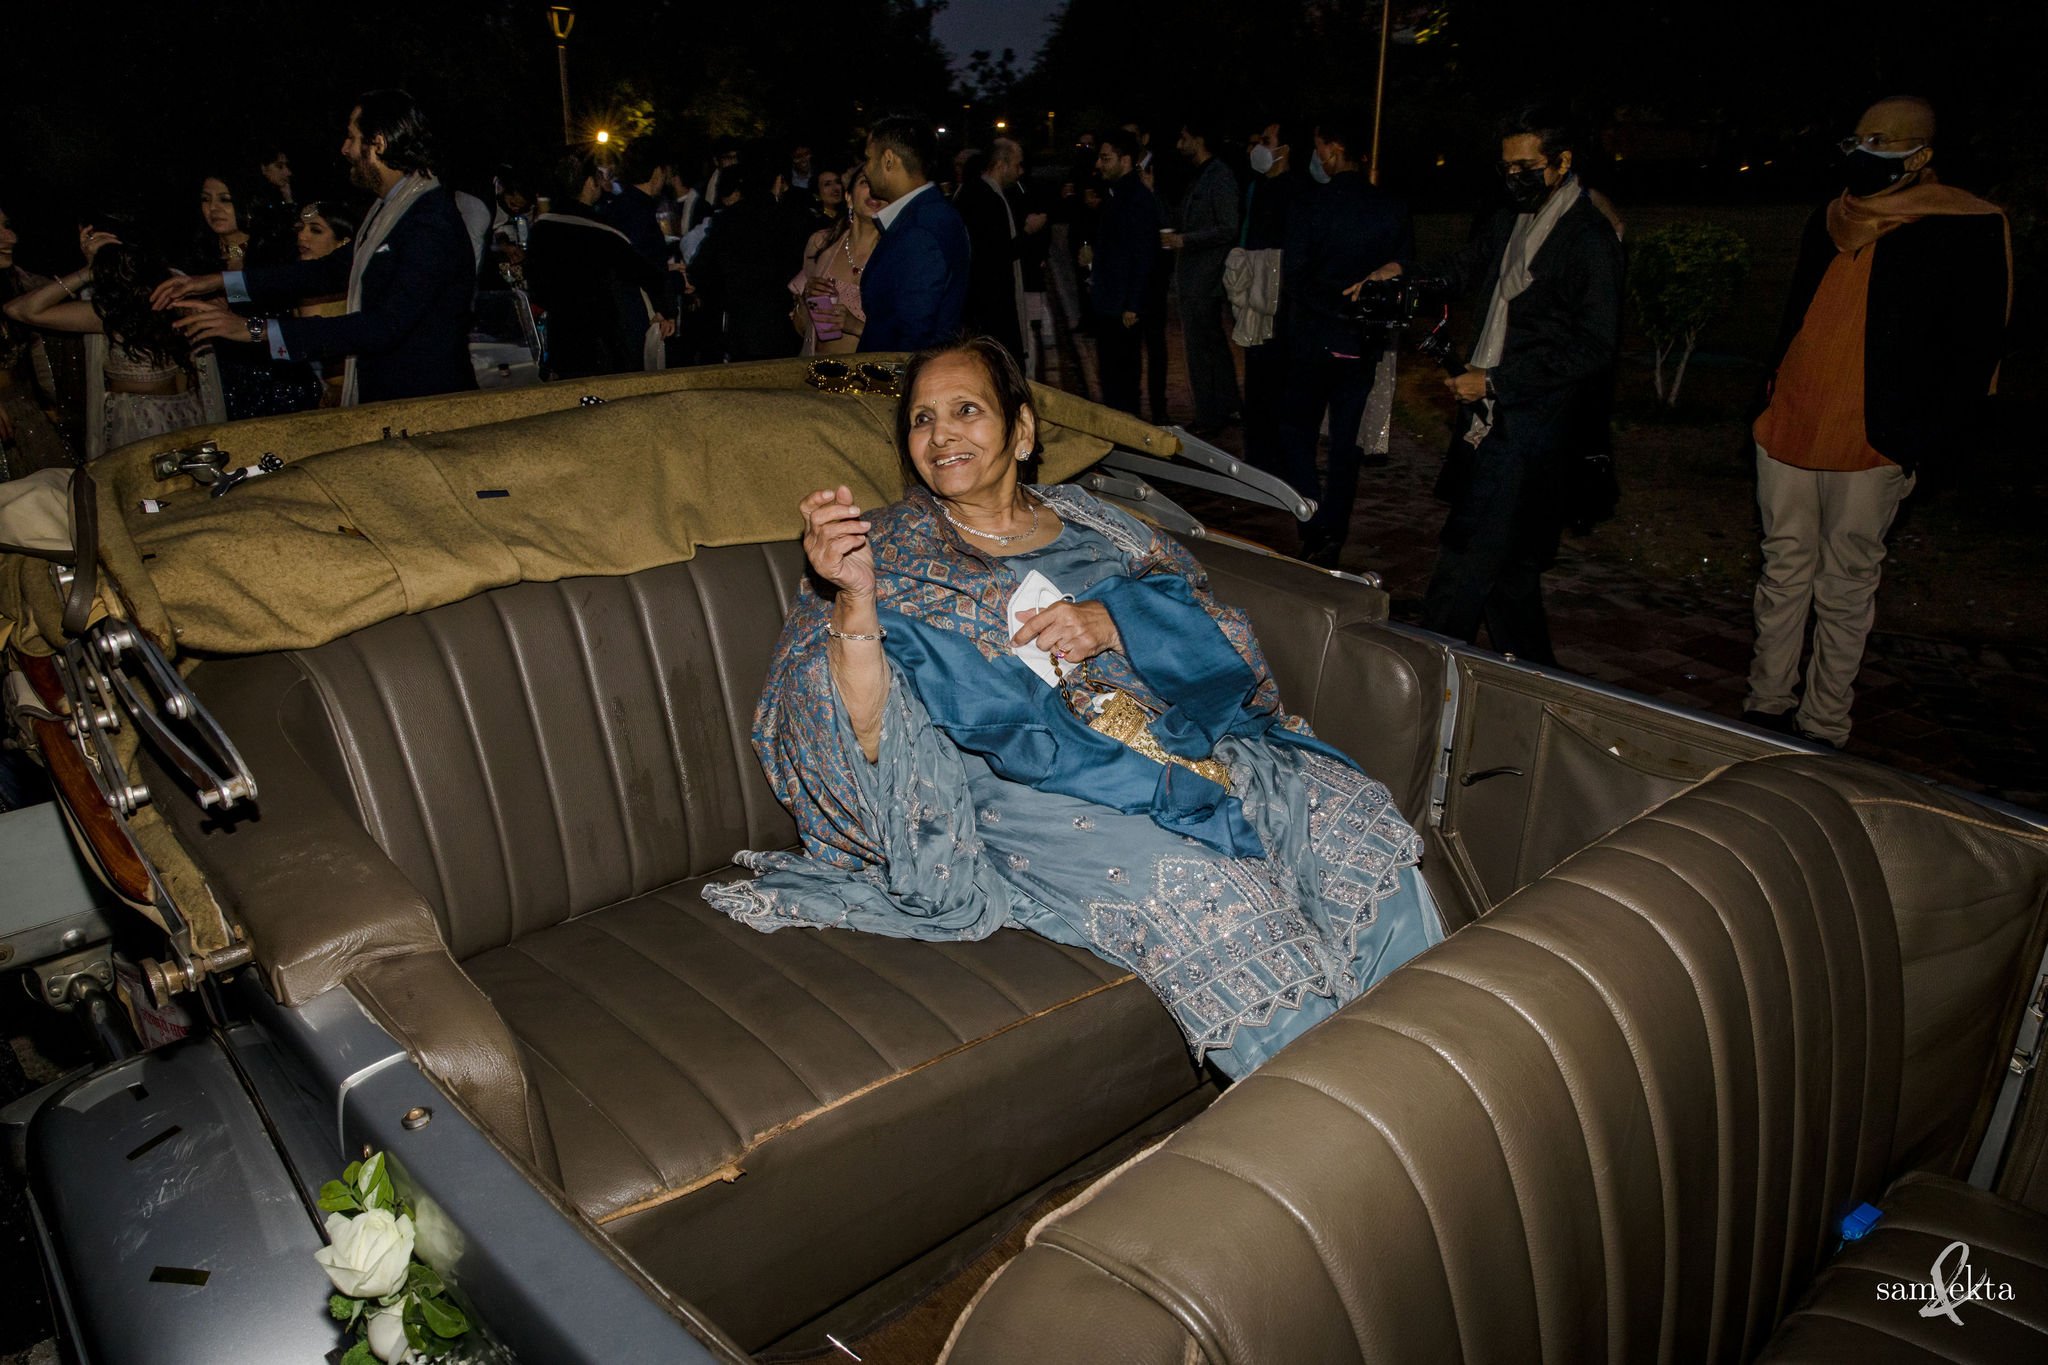 Ishaan's grandmom cheers everyone on from her seat in that beautiful vintage car